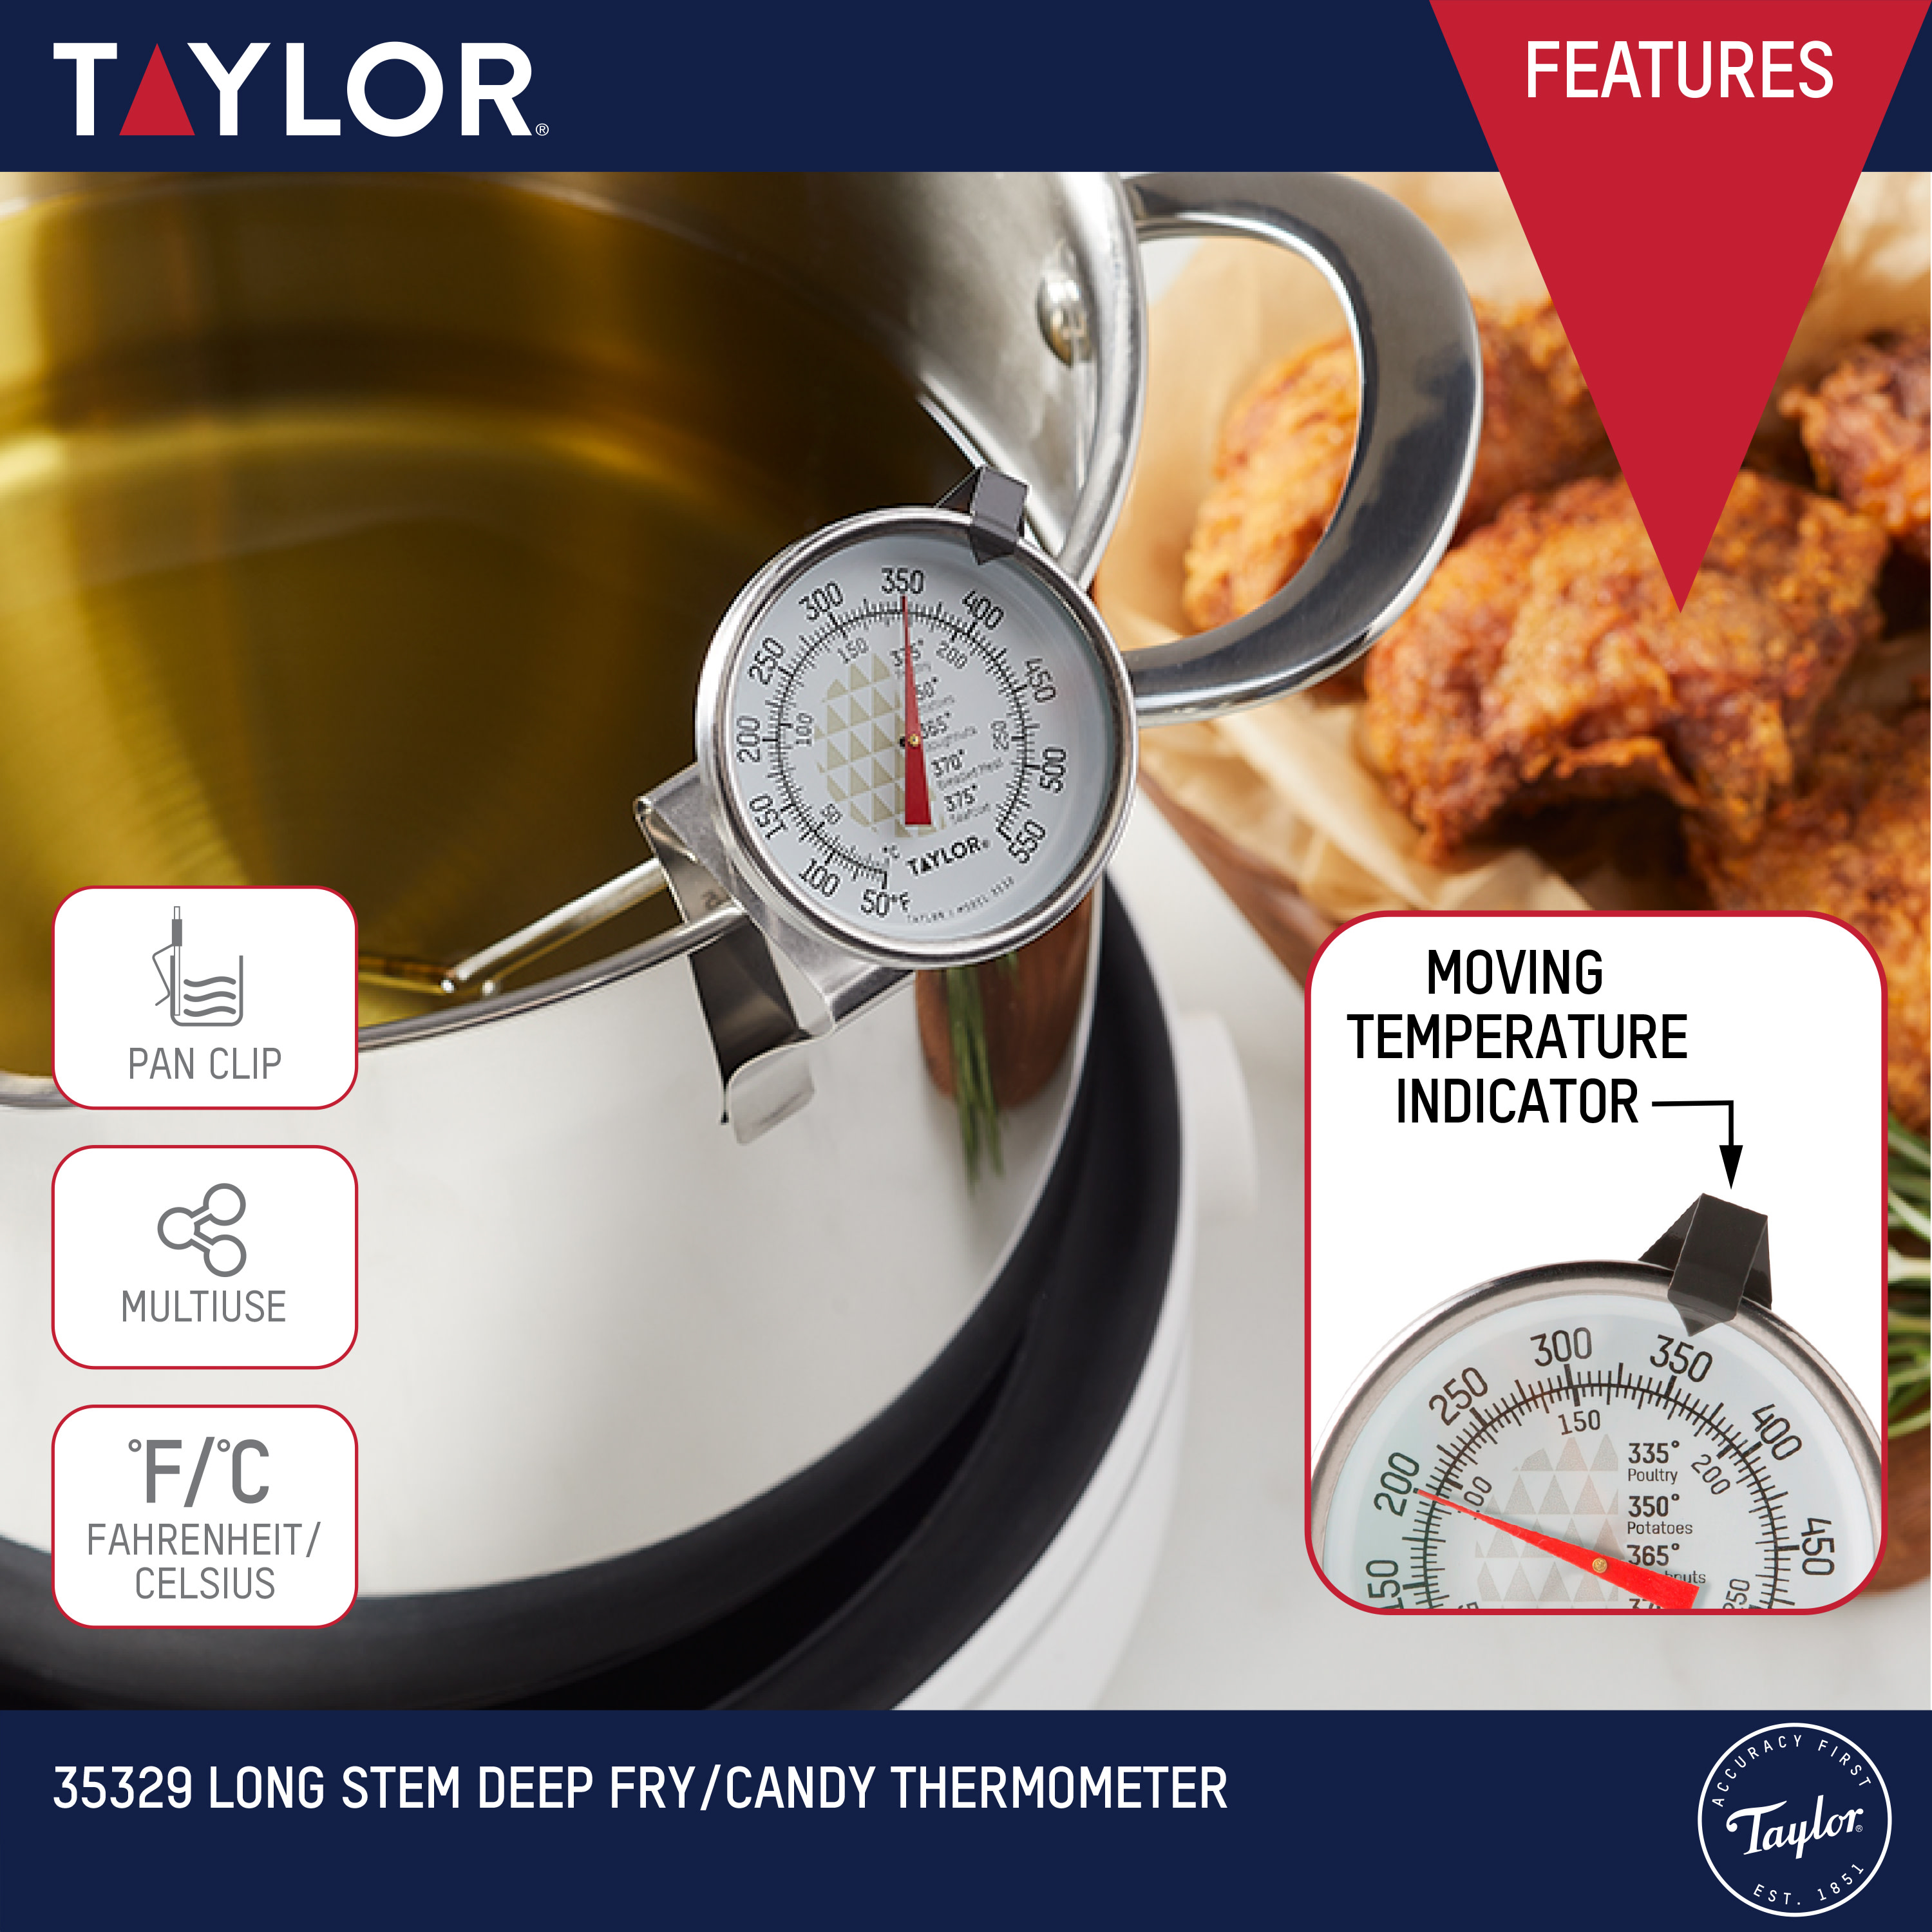 Taylor Candy and Deep Fry Analog Thermometer with Adjustable Pan Clip with 1.75-inch Dial - image 3 of 10